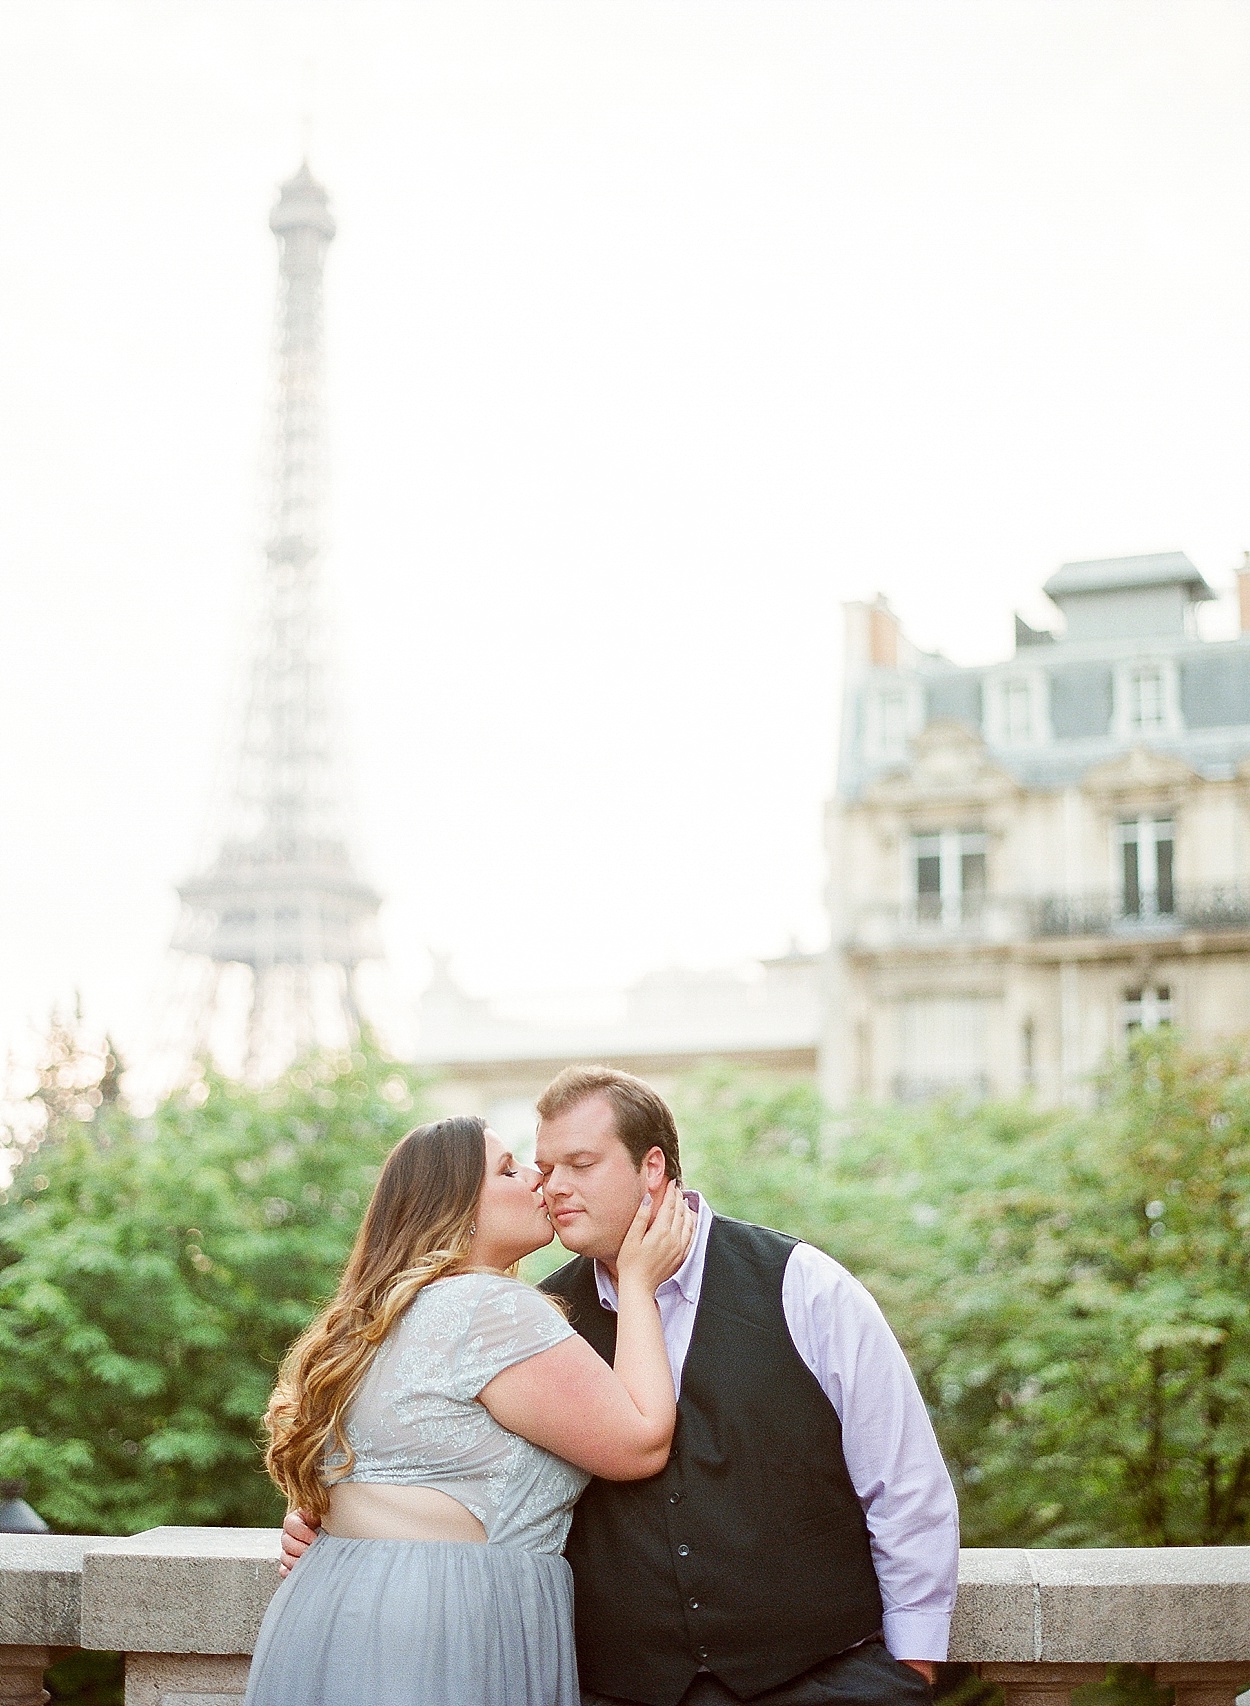 Paris engagement photo at the Eiffel Tower | by Abby Grace